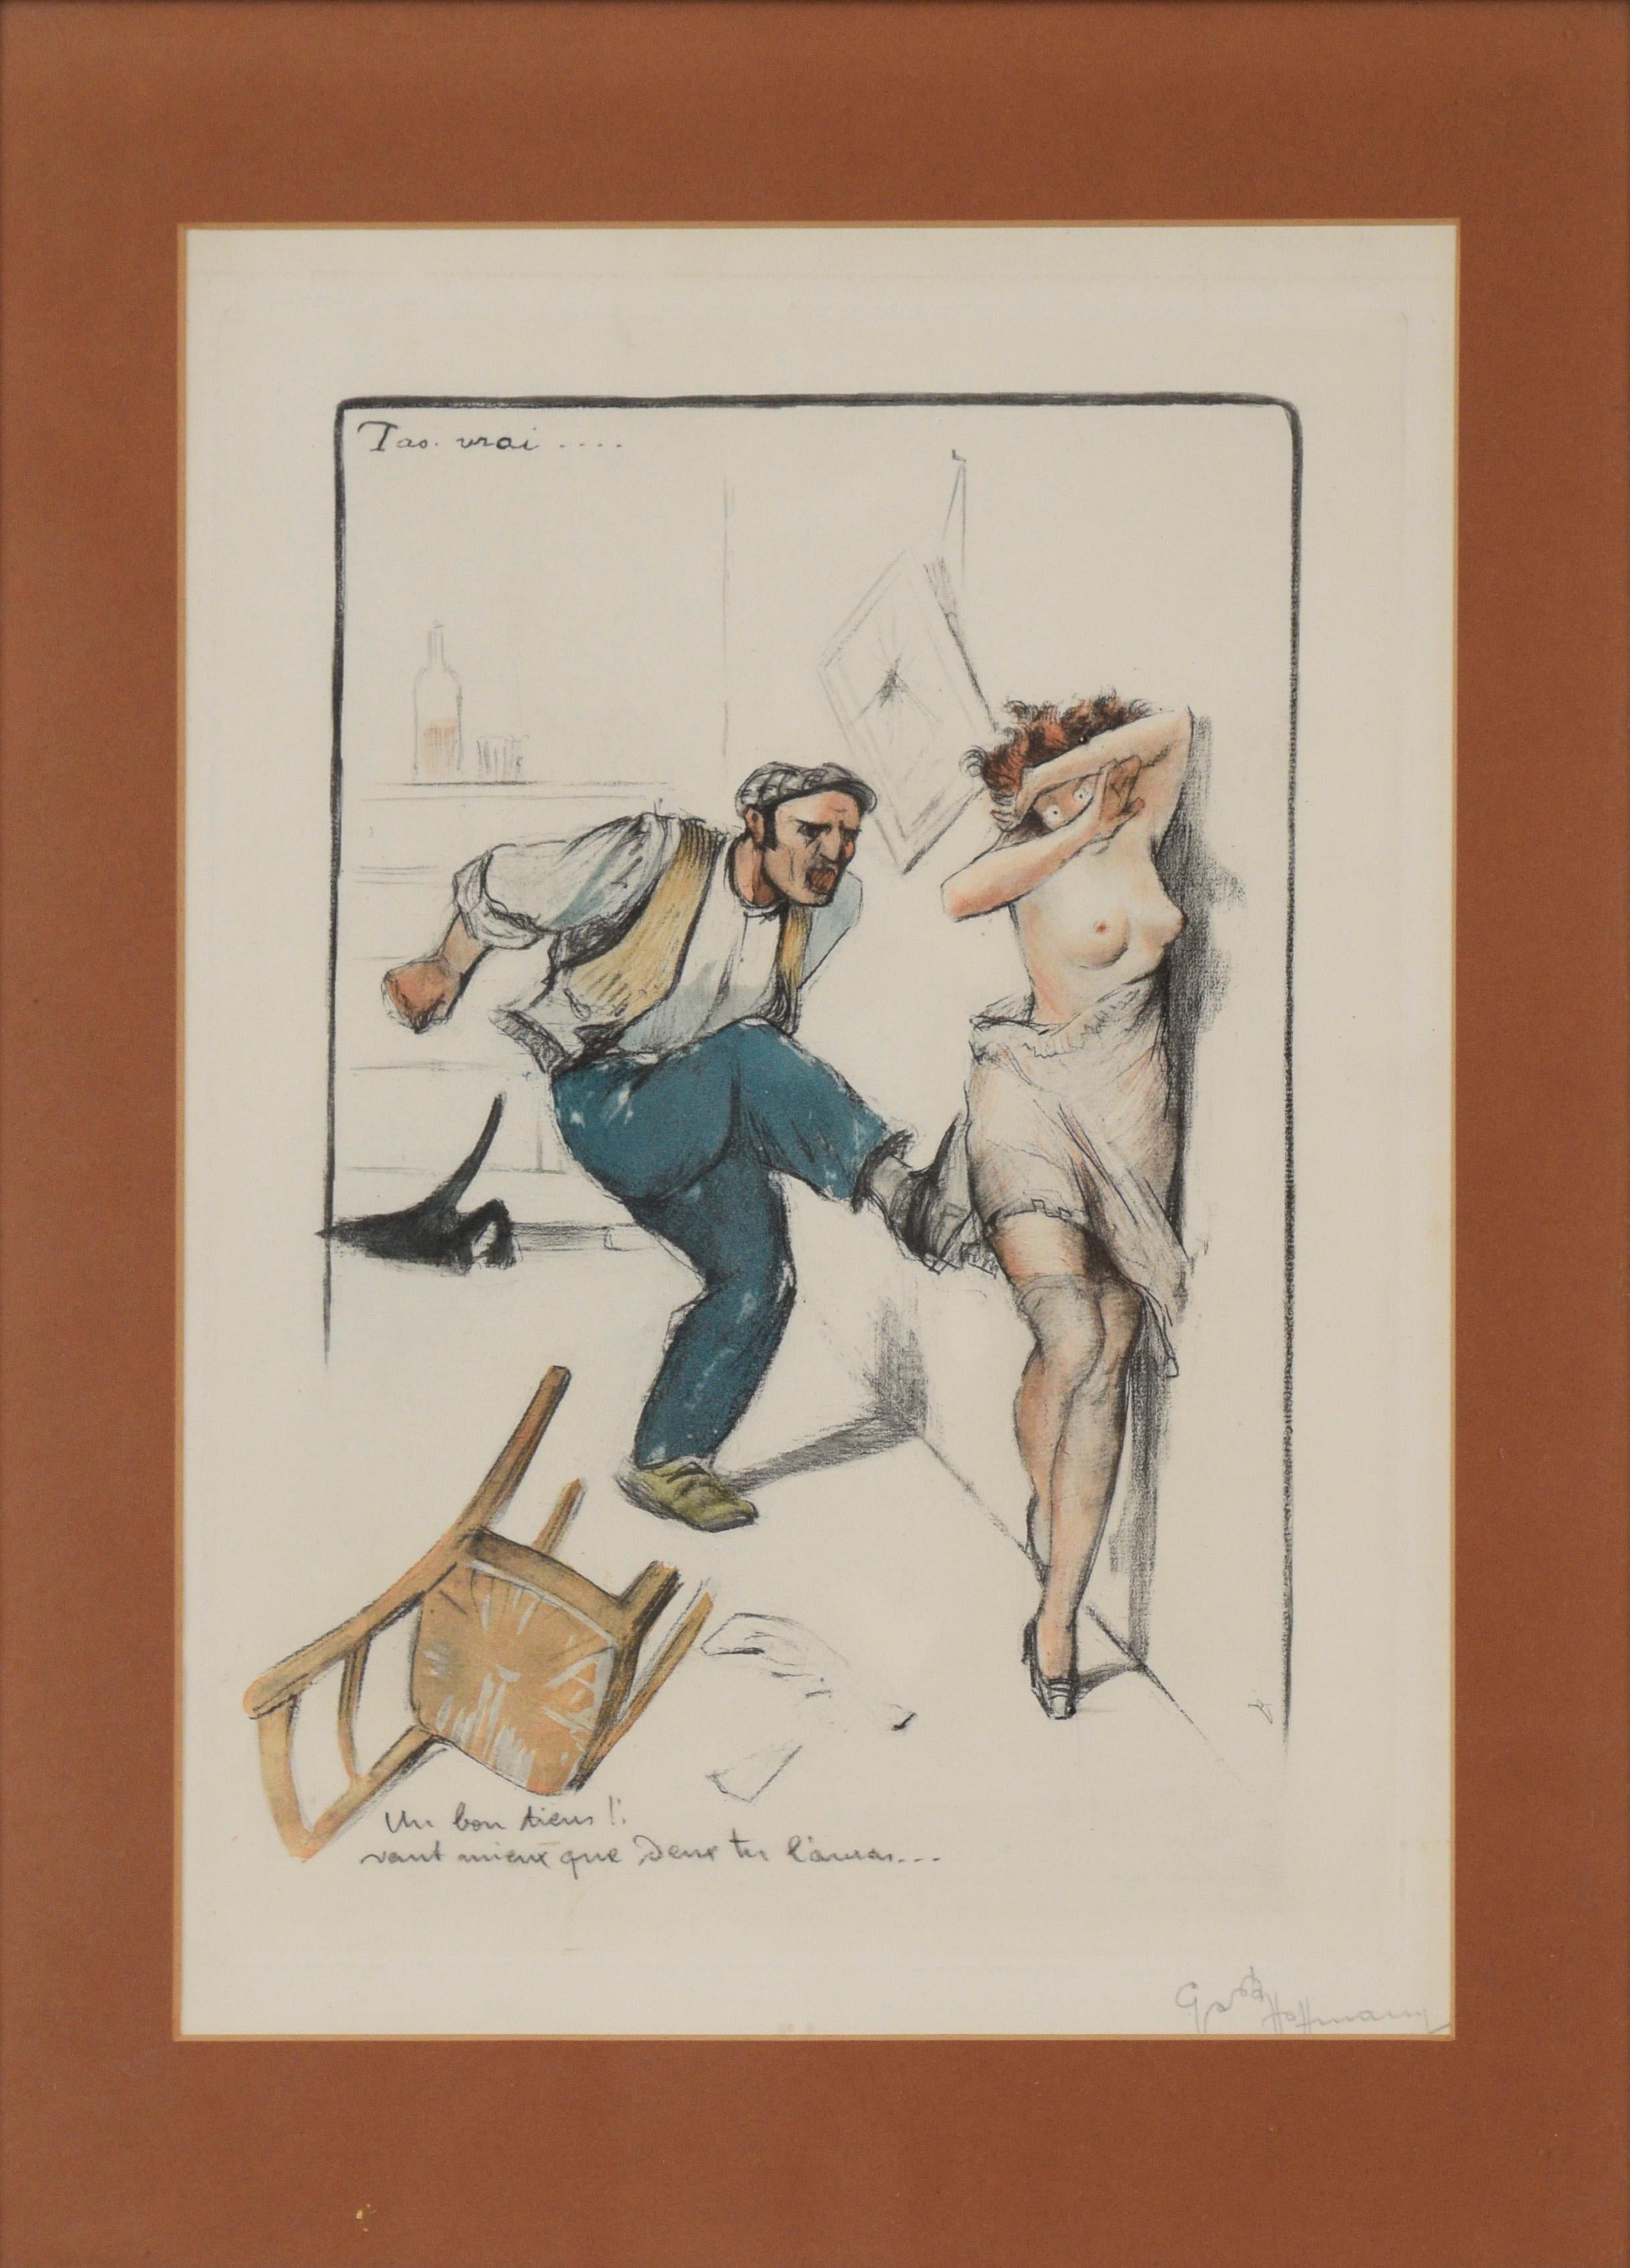 Satirical French Illustration of Man and Woman  - Realist Print by Gaston Hoffmann